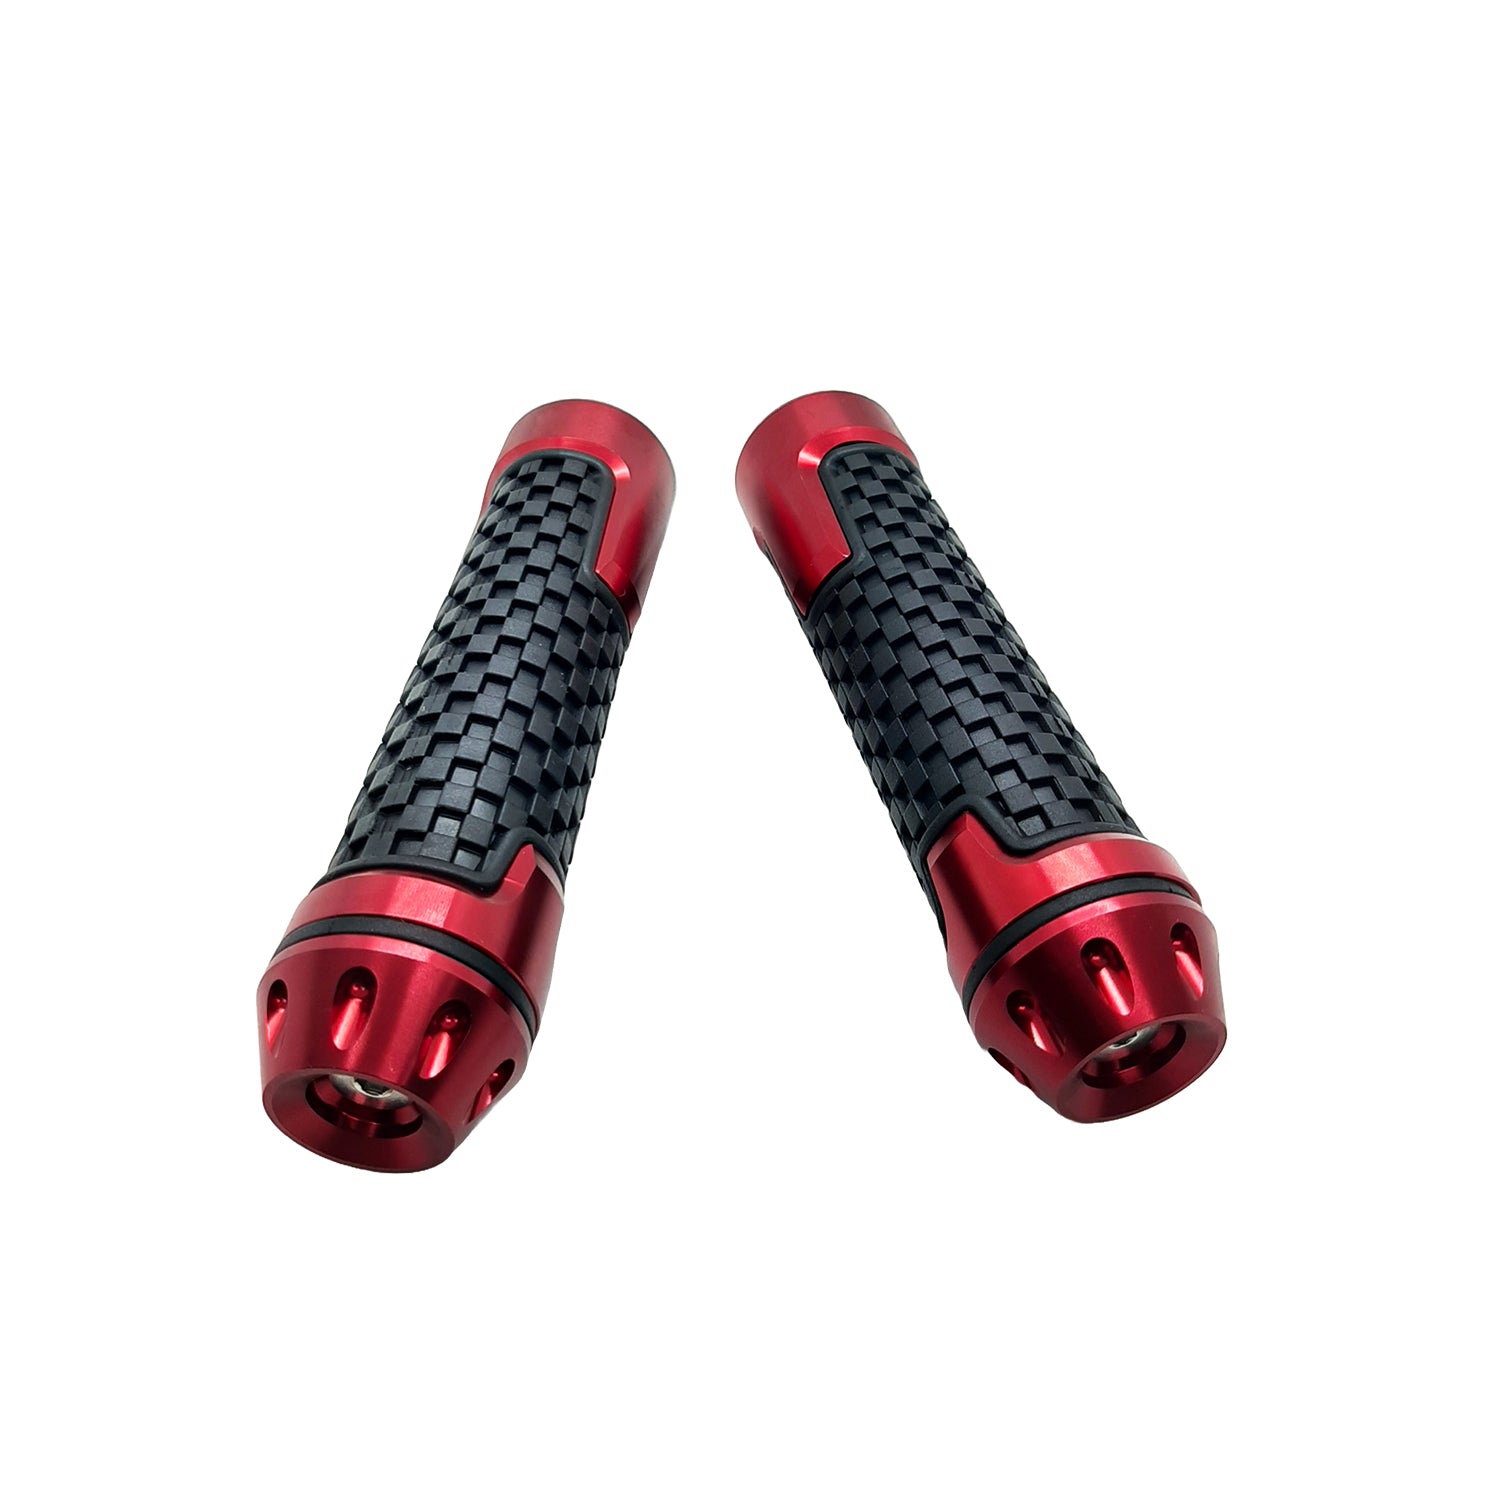 Aluminum and Rubber Motorcycle Grips Non Slip Universal High Strength